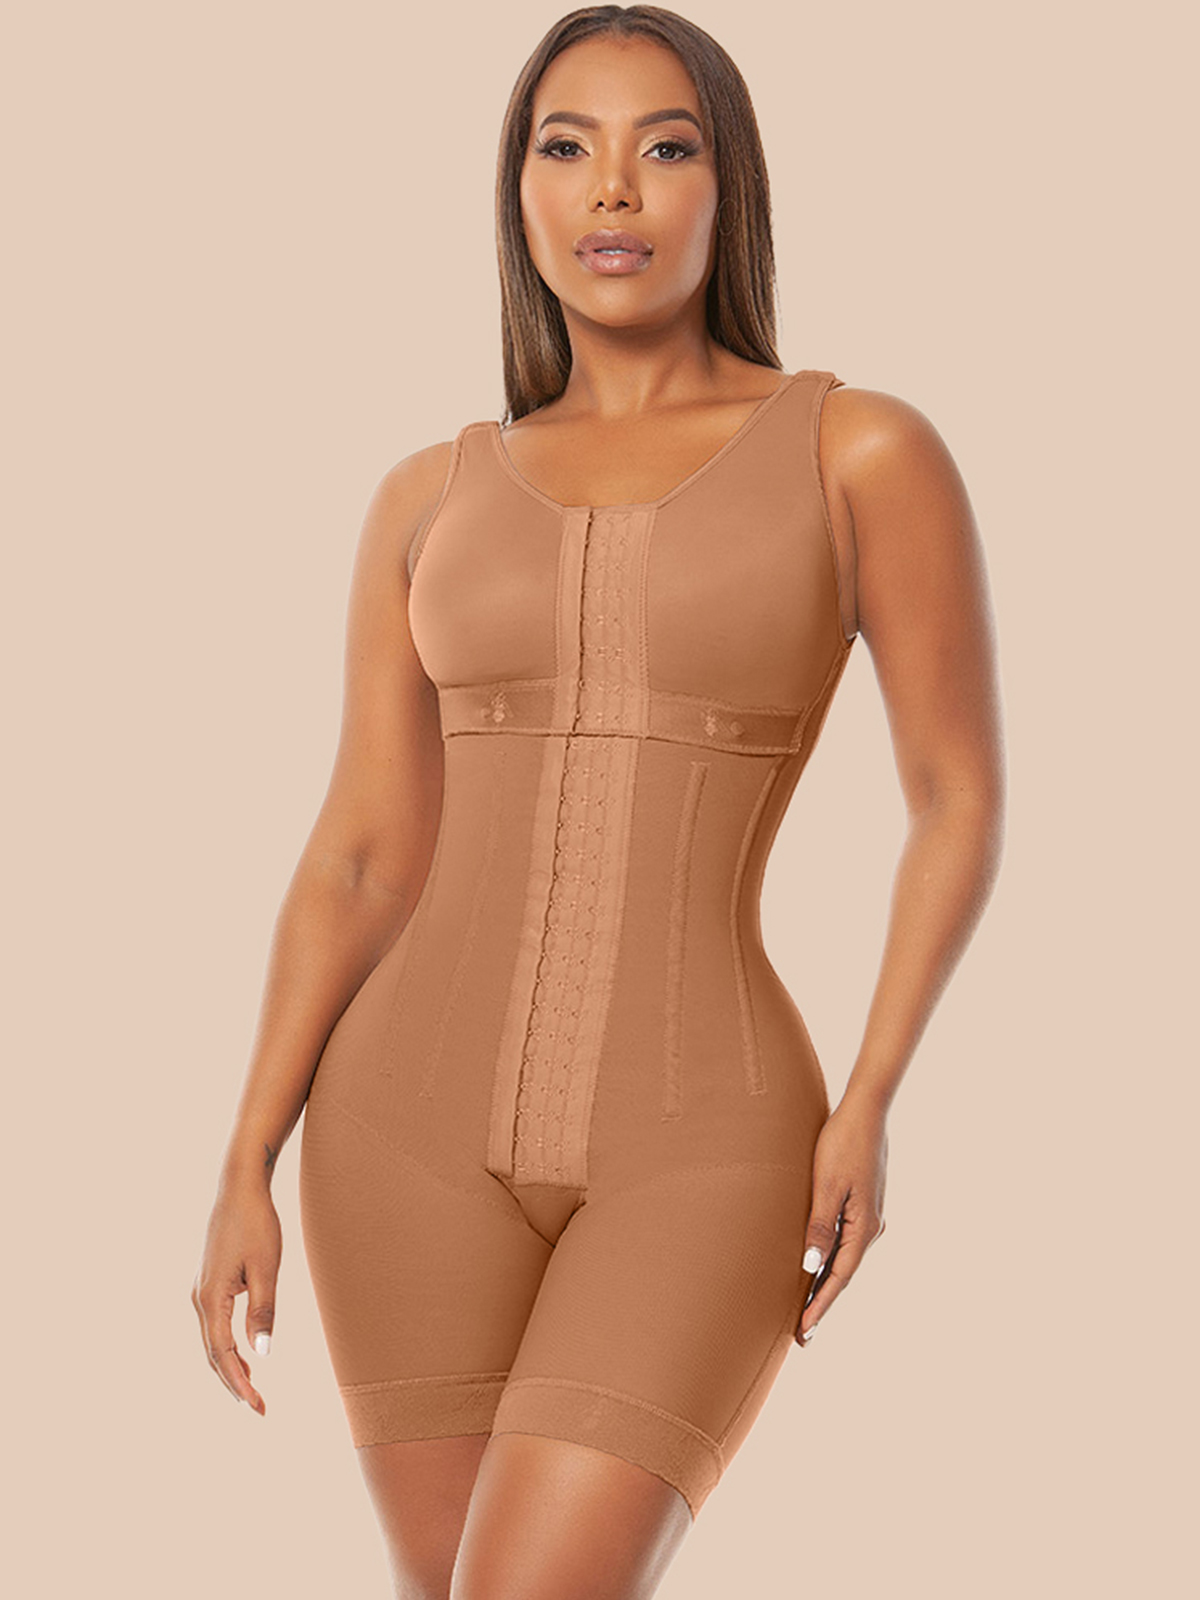 Check out this new #faja #waisttrainer I just got from chic-curve.com using  coupon code: Candace 